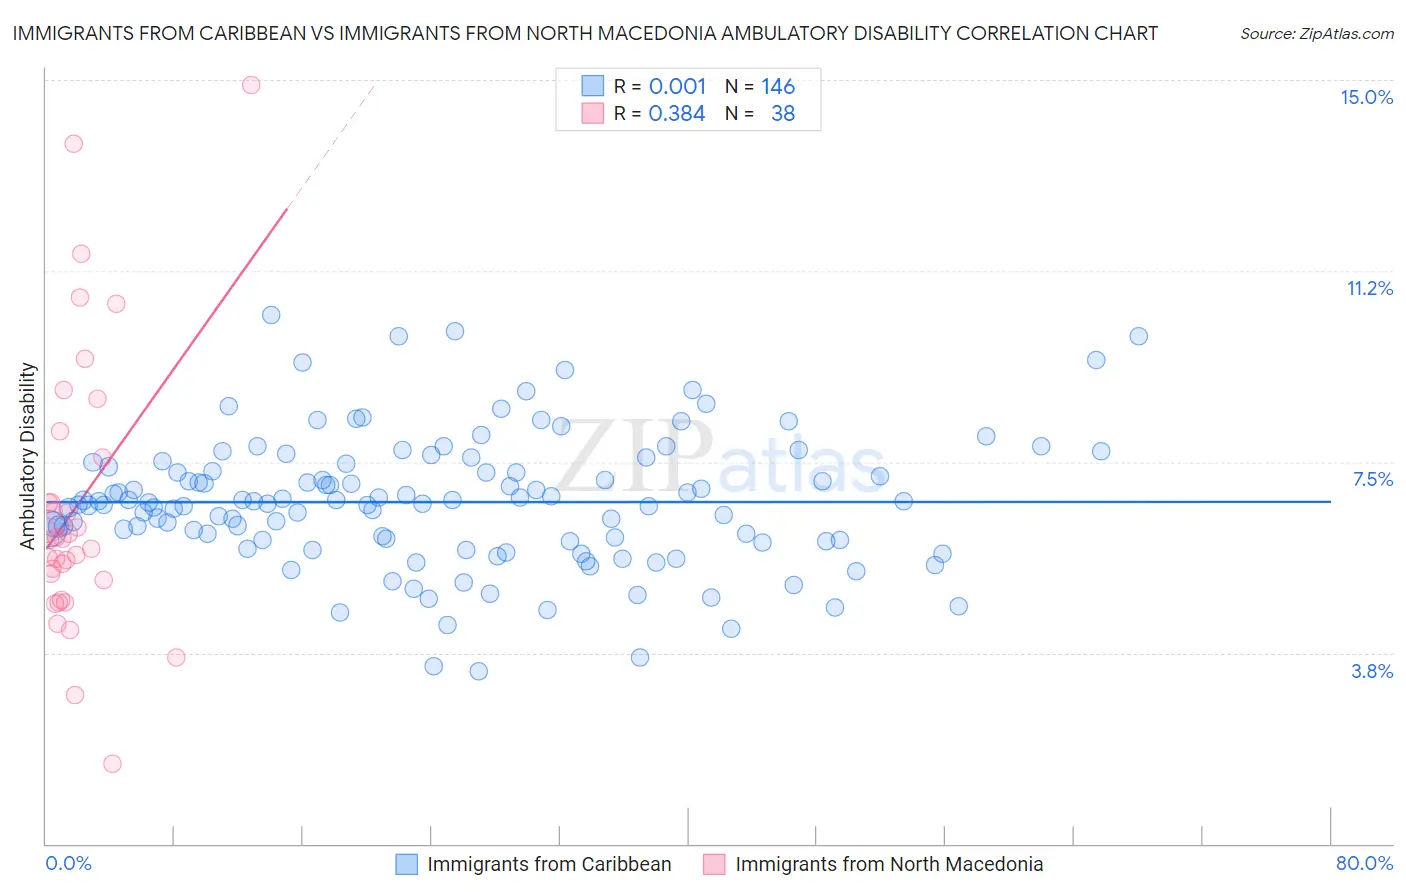 Immigrants from Caribbean vs Immigrants from North Macedonia Ambulatory Disability